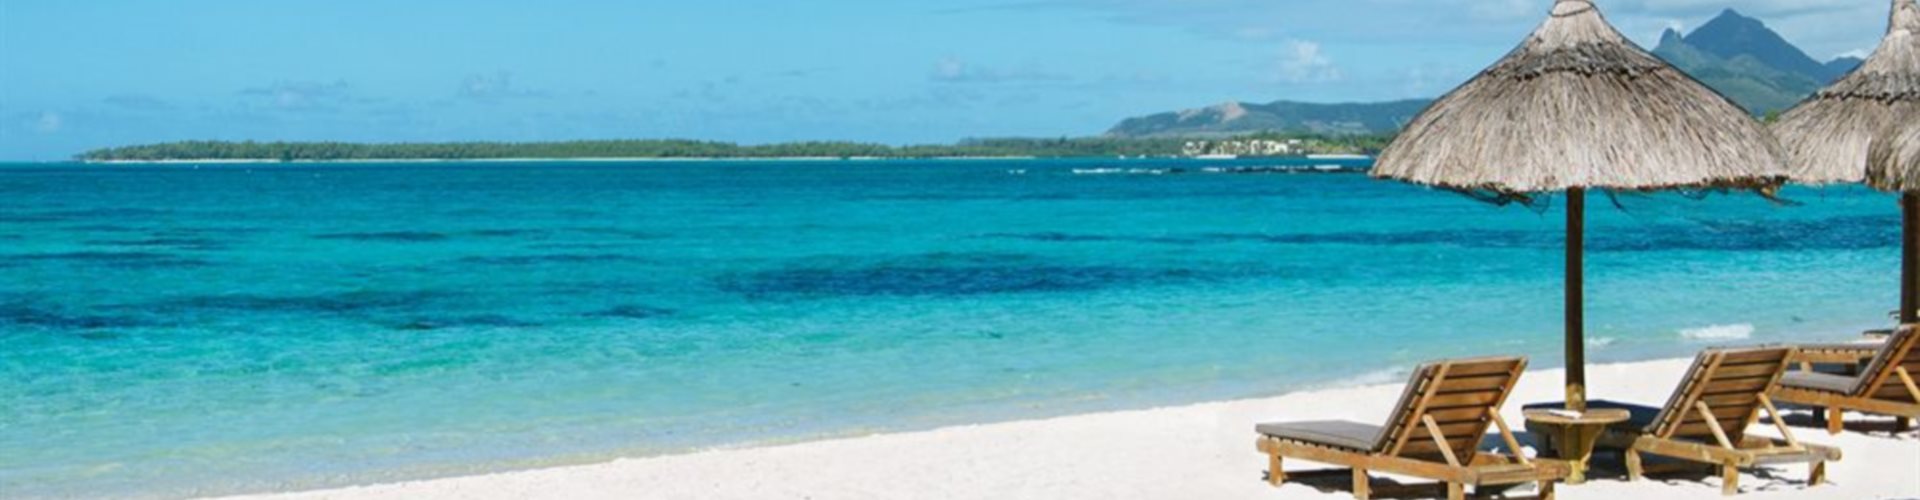 All Inclusive Mauritius Holiday